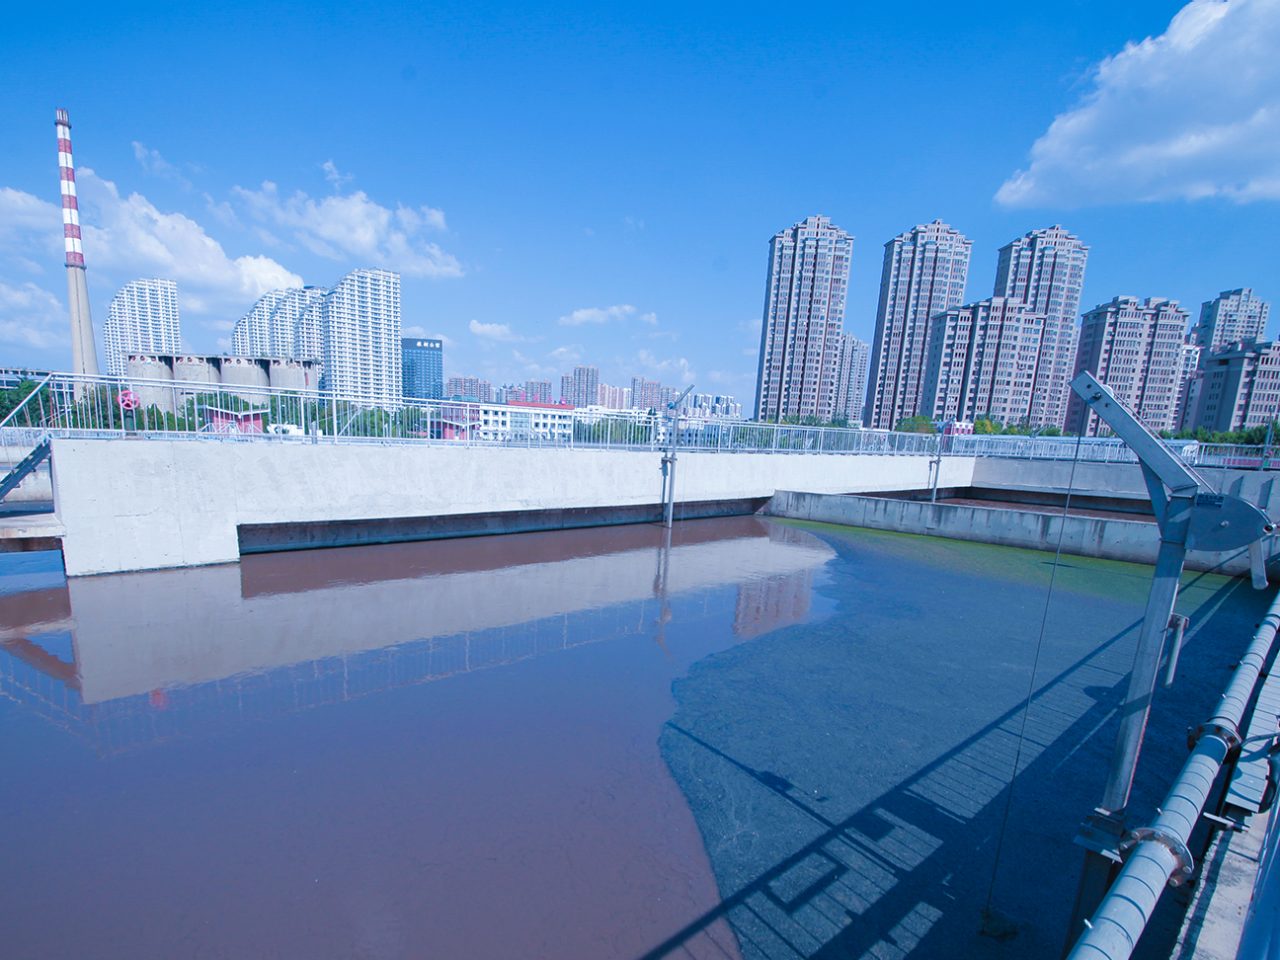 Hengji Water developed over 80 wastewater treatment-led technologies